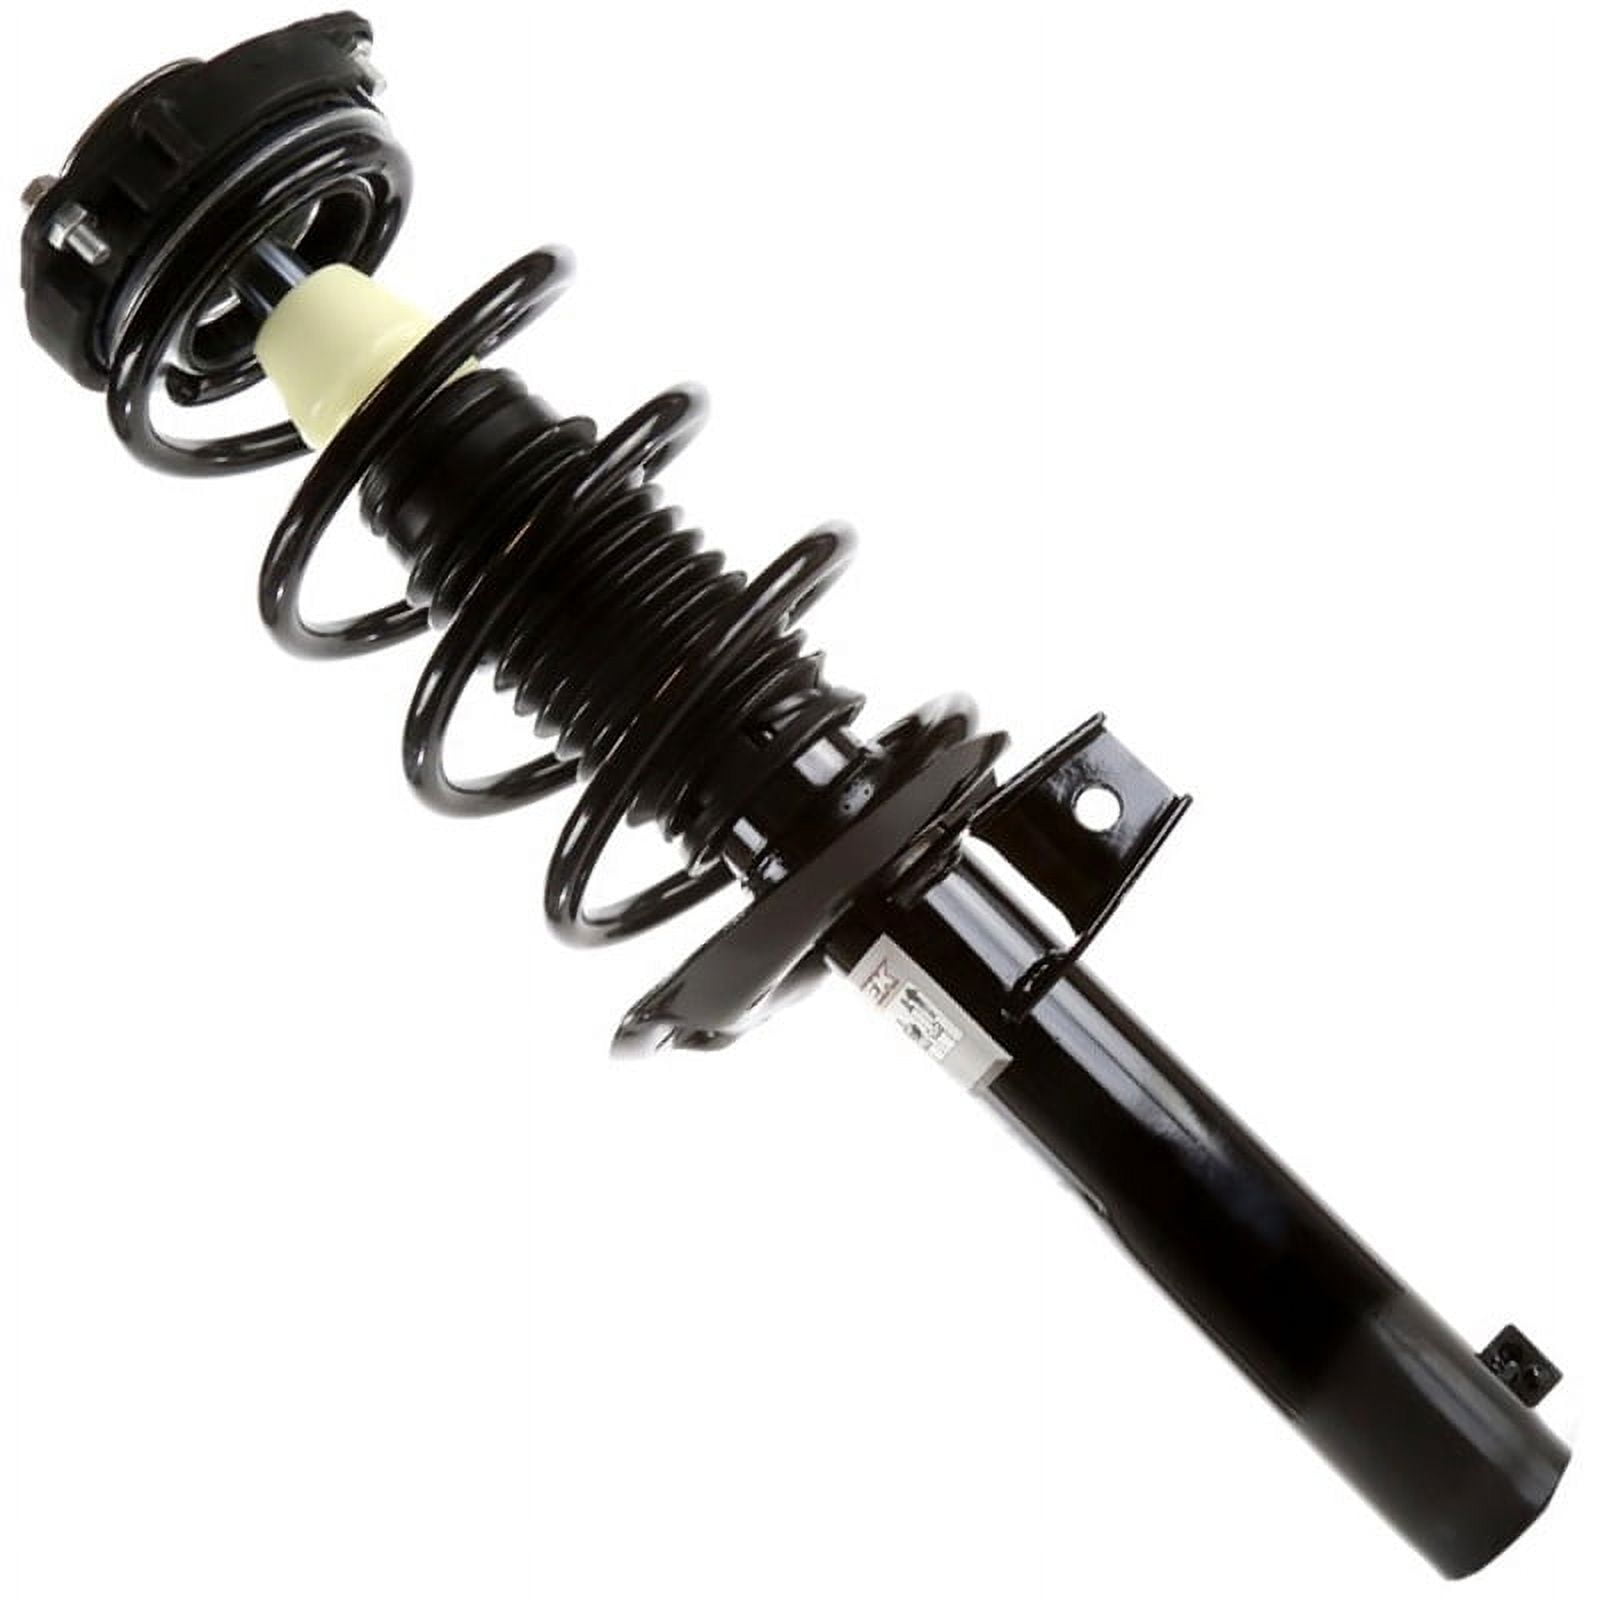 Detroit Axle - Front Struts w/Coil Spring Assembly Rear Shocks Replacement  for Volkswagen Beetle Golf Jetta 